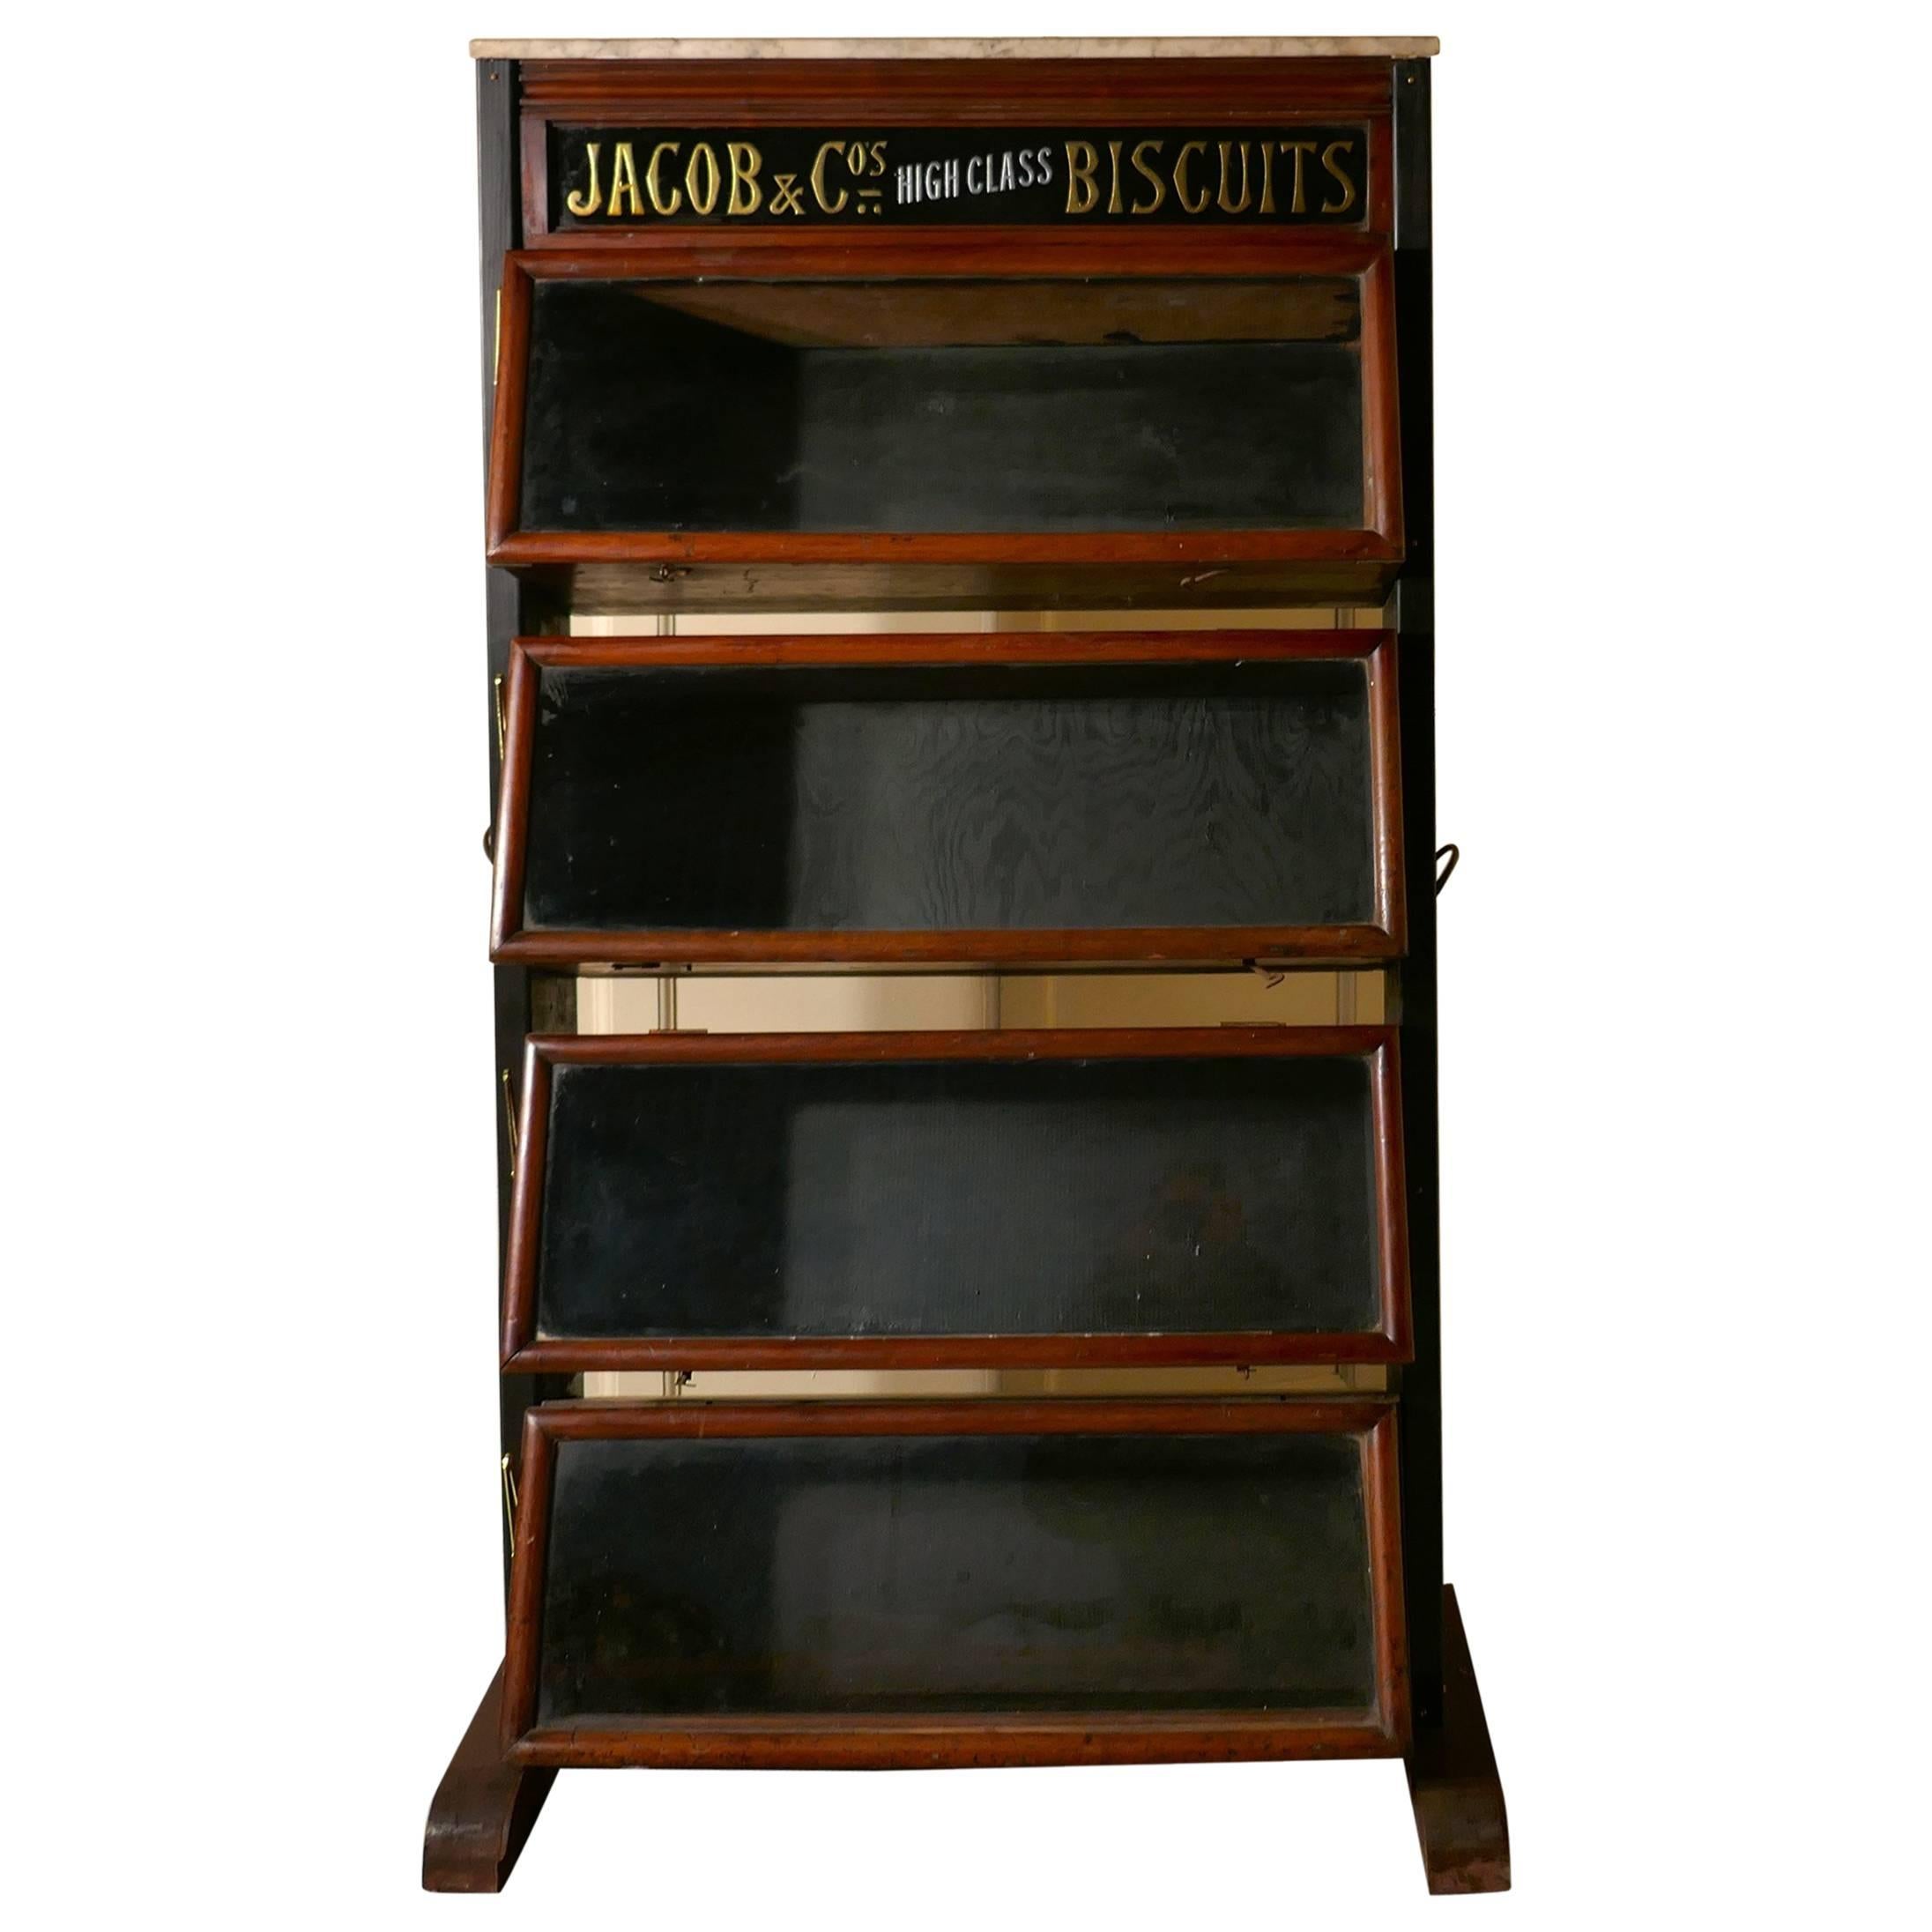 Jacob & Co’s High Class Biscuits Shop Display Cabinet 